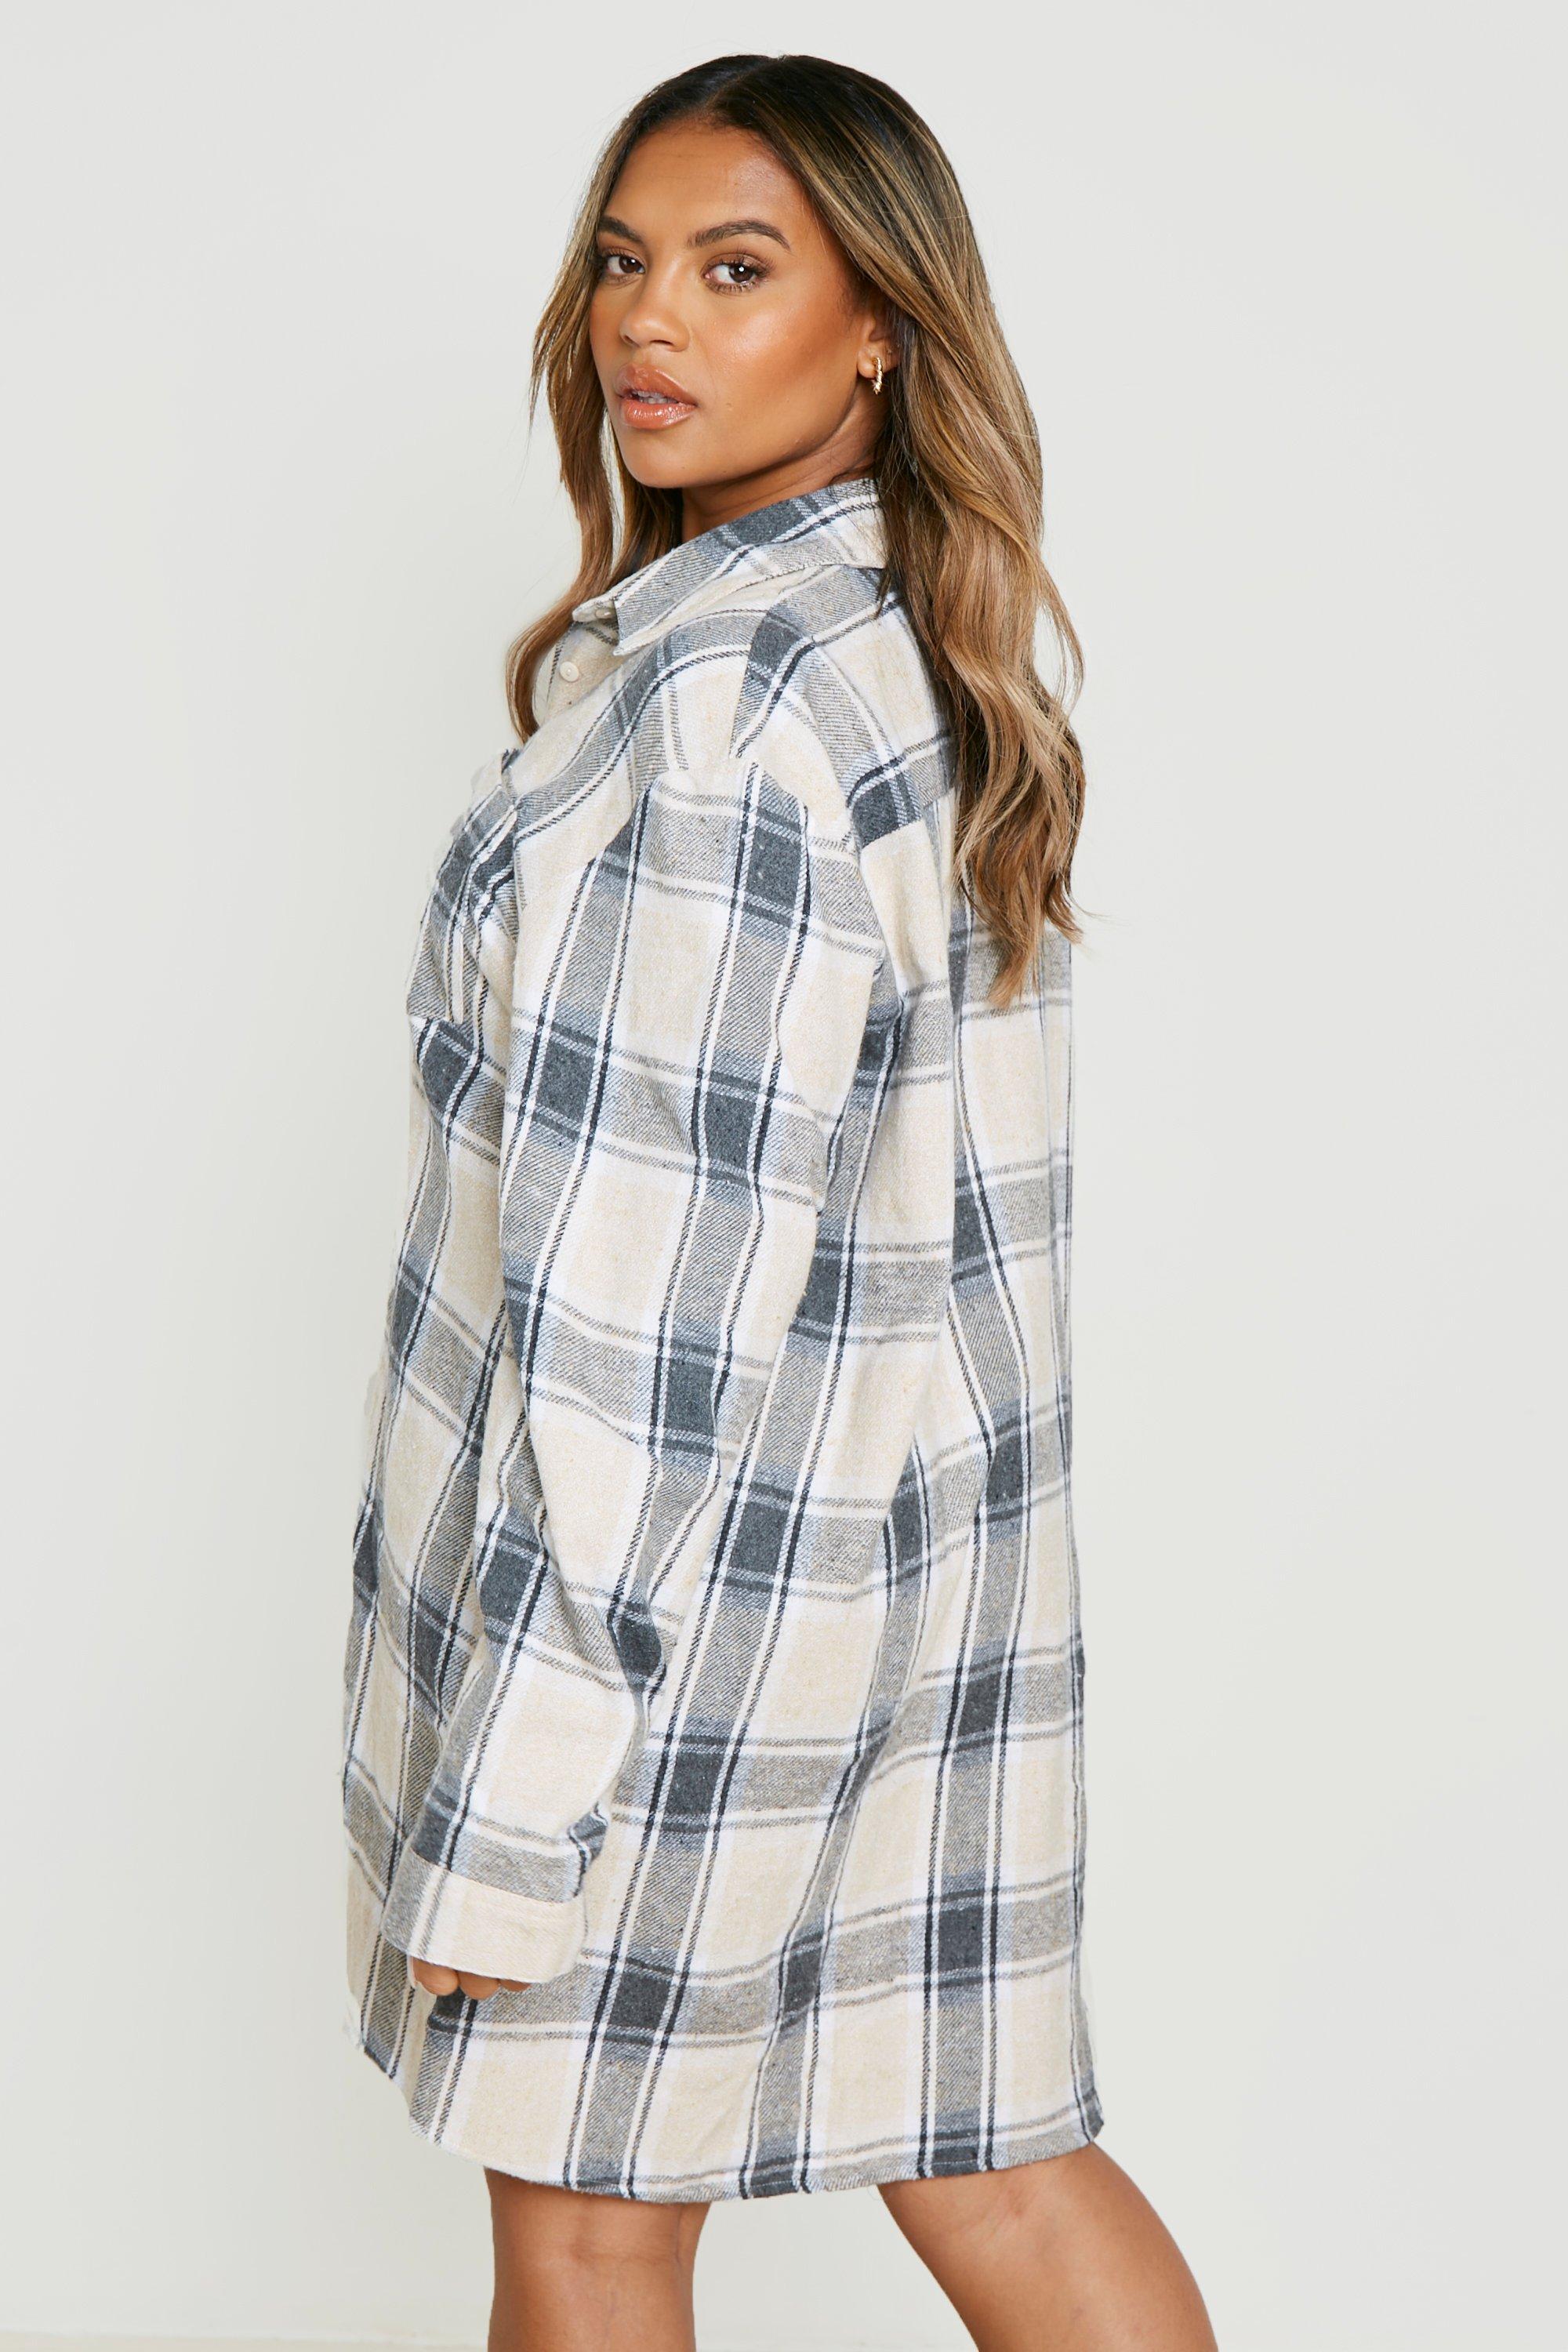 RED AND WHITE PLAID PATTERN DRESS IN BRUSHED FLANNEL, BABY